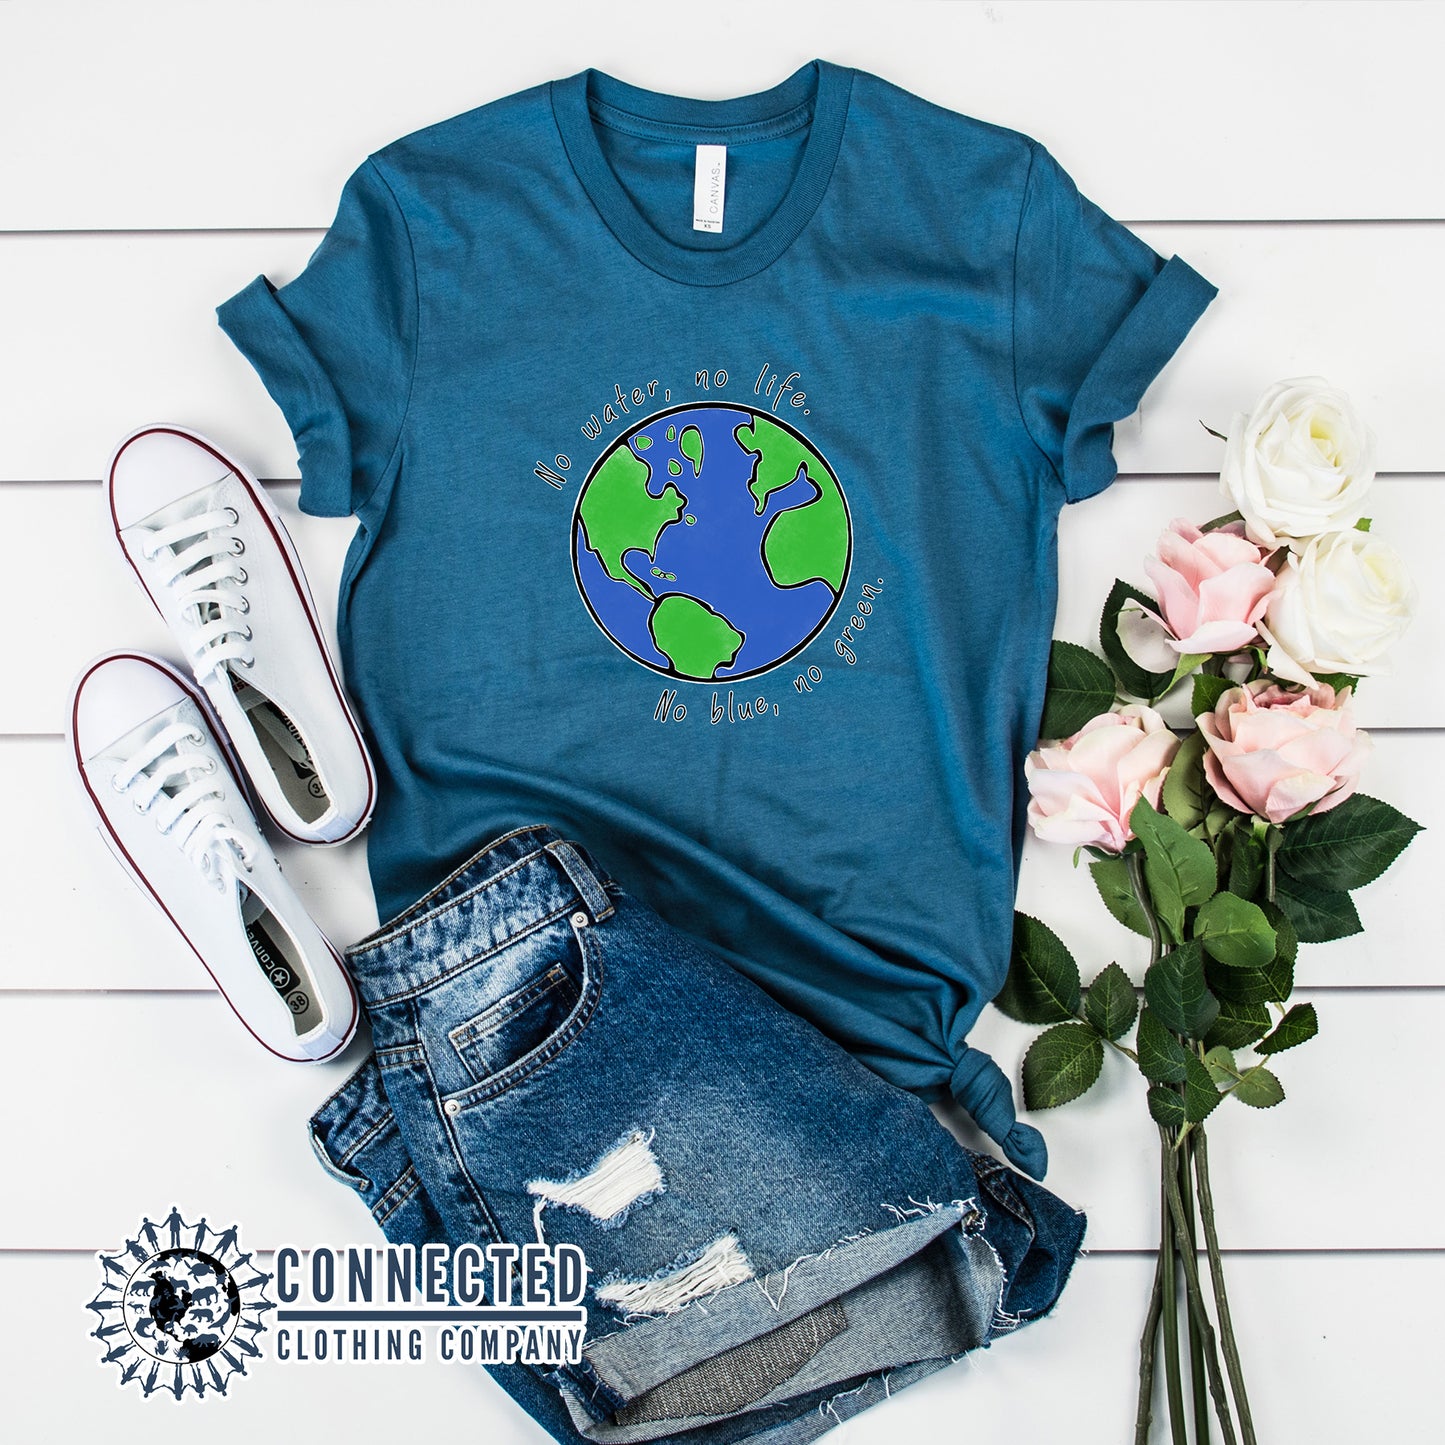 Steel Blue No Blue No Green Short-Sleeve Tee - sweetsherriloudesigns - Ethically and sustainably made -  10% of profits donated to ocean conservation